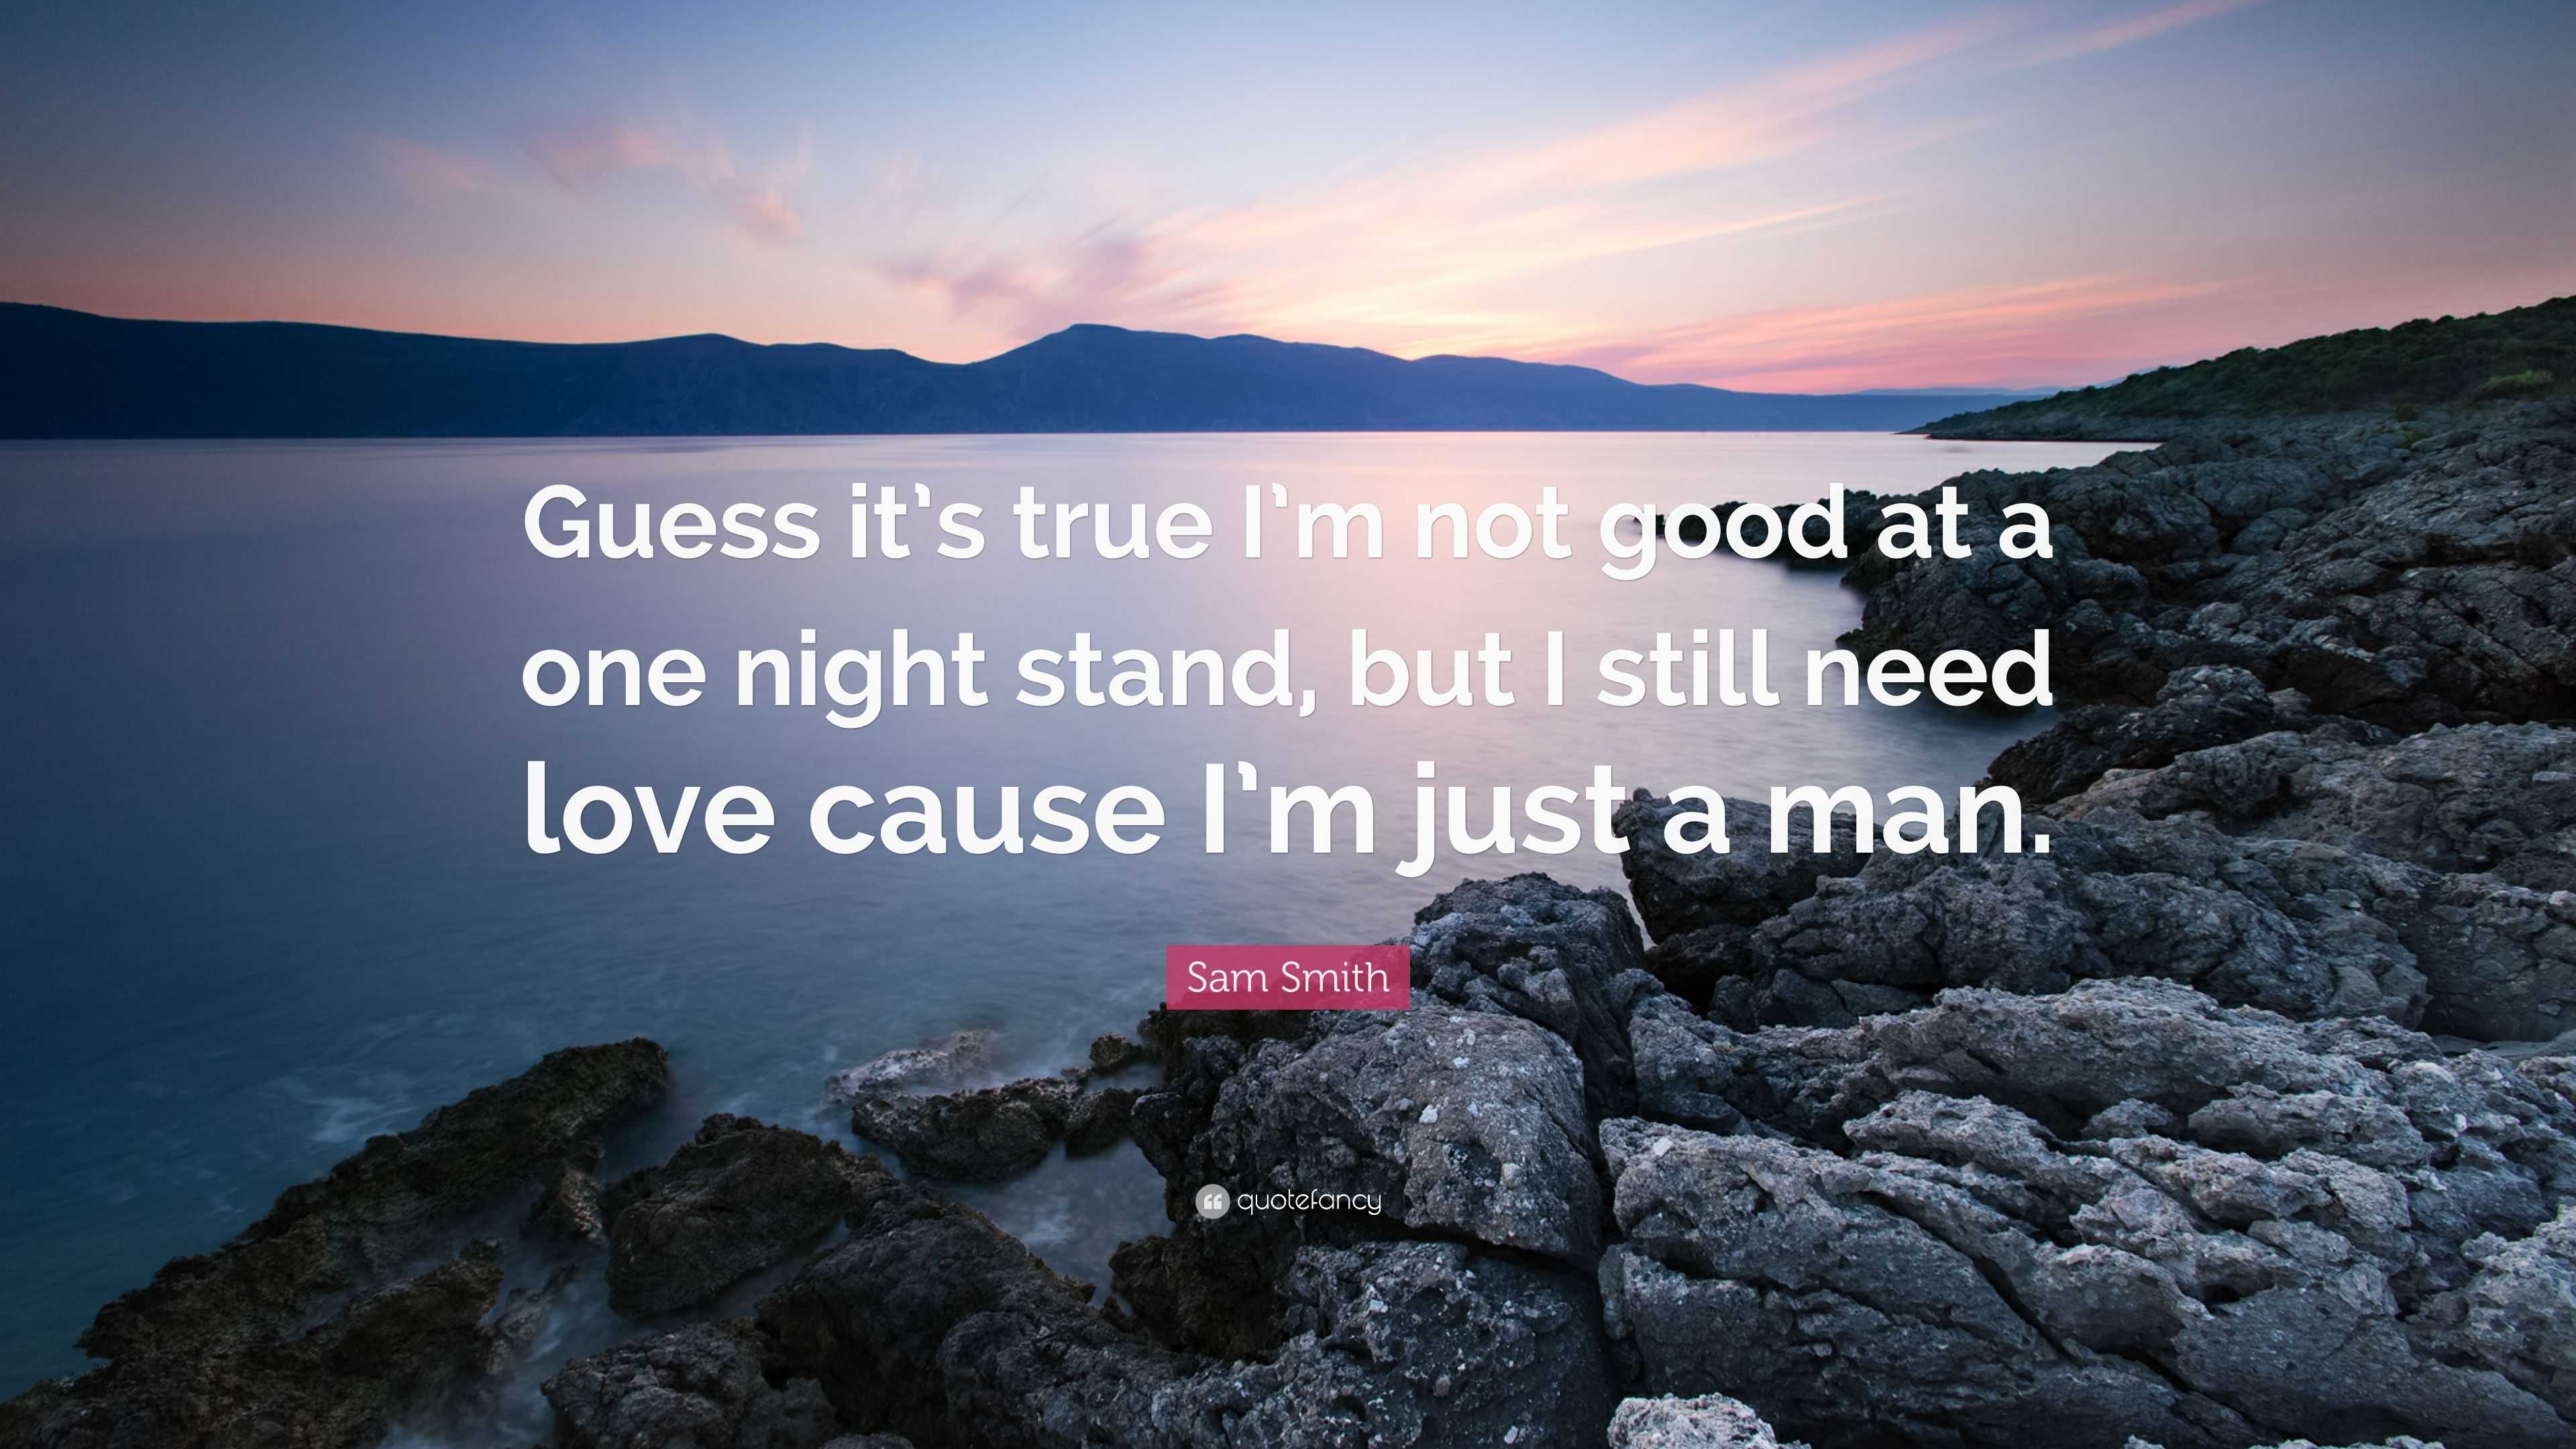 Sam Smith Quote: “Guess it's true I'm not good at a one night stand, but